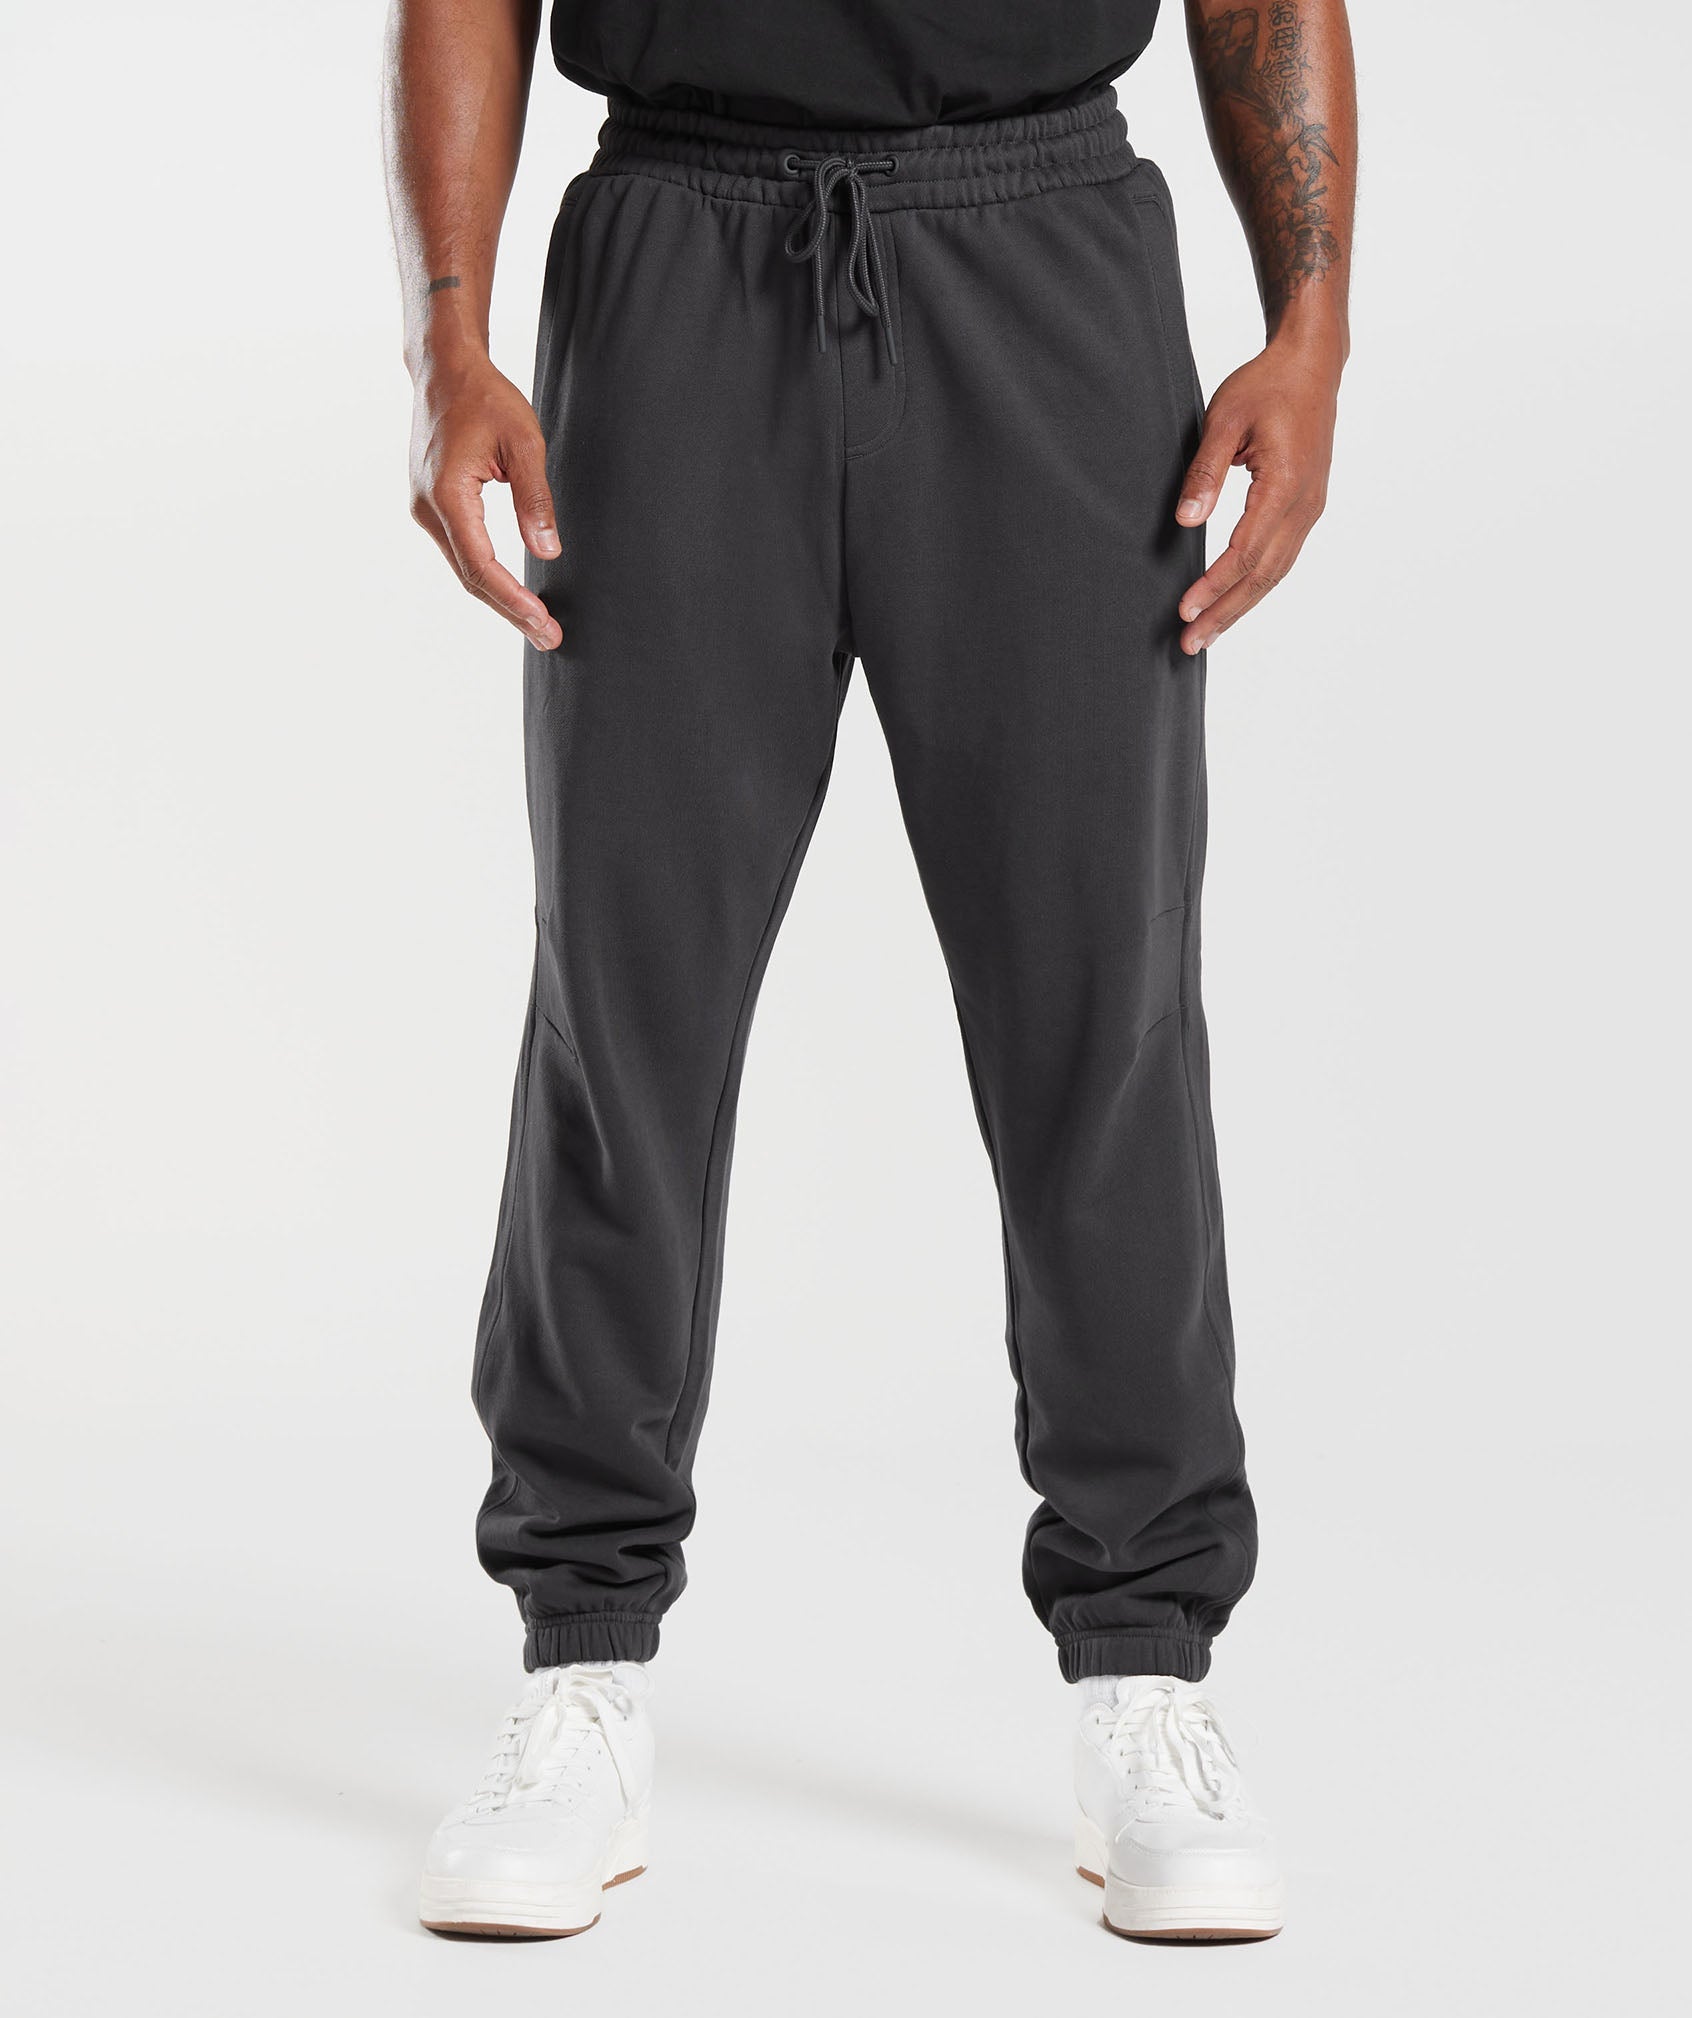 Rest Day Essentials Joggers in Onyx Grey - view 1